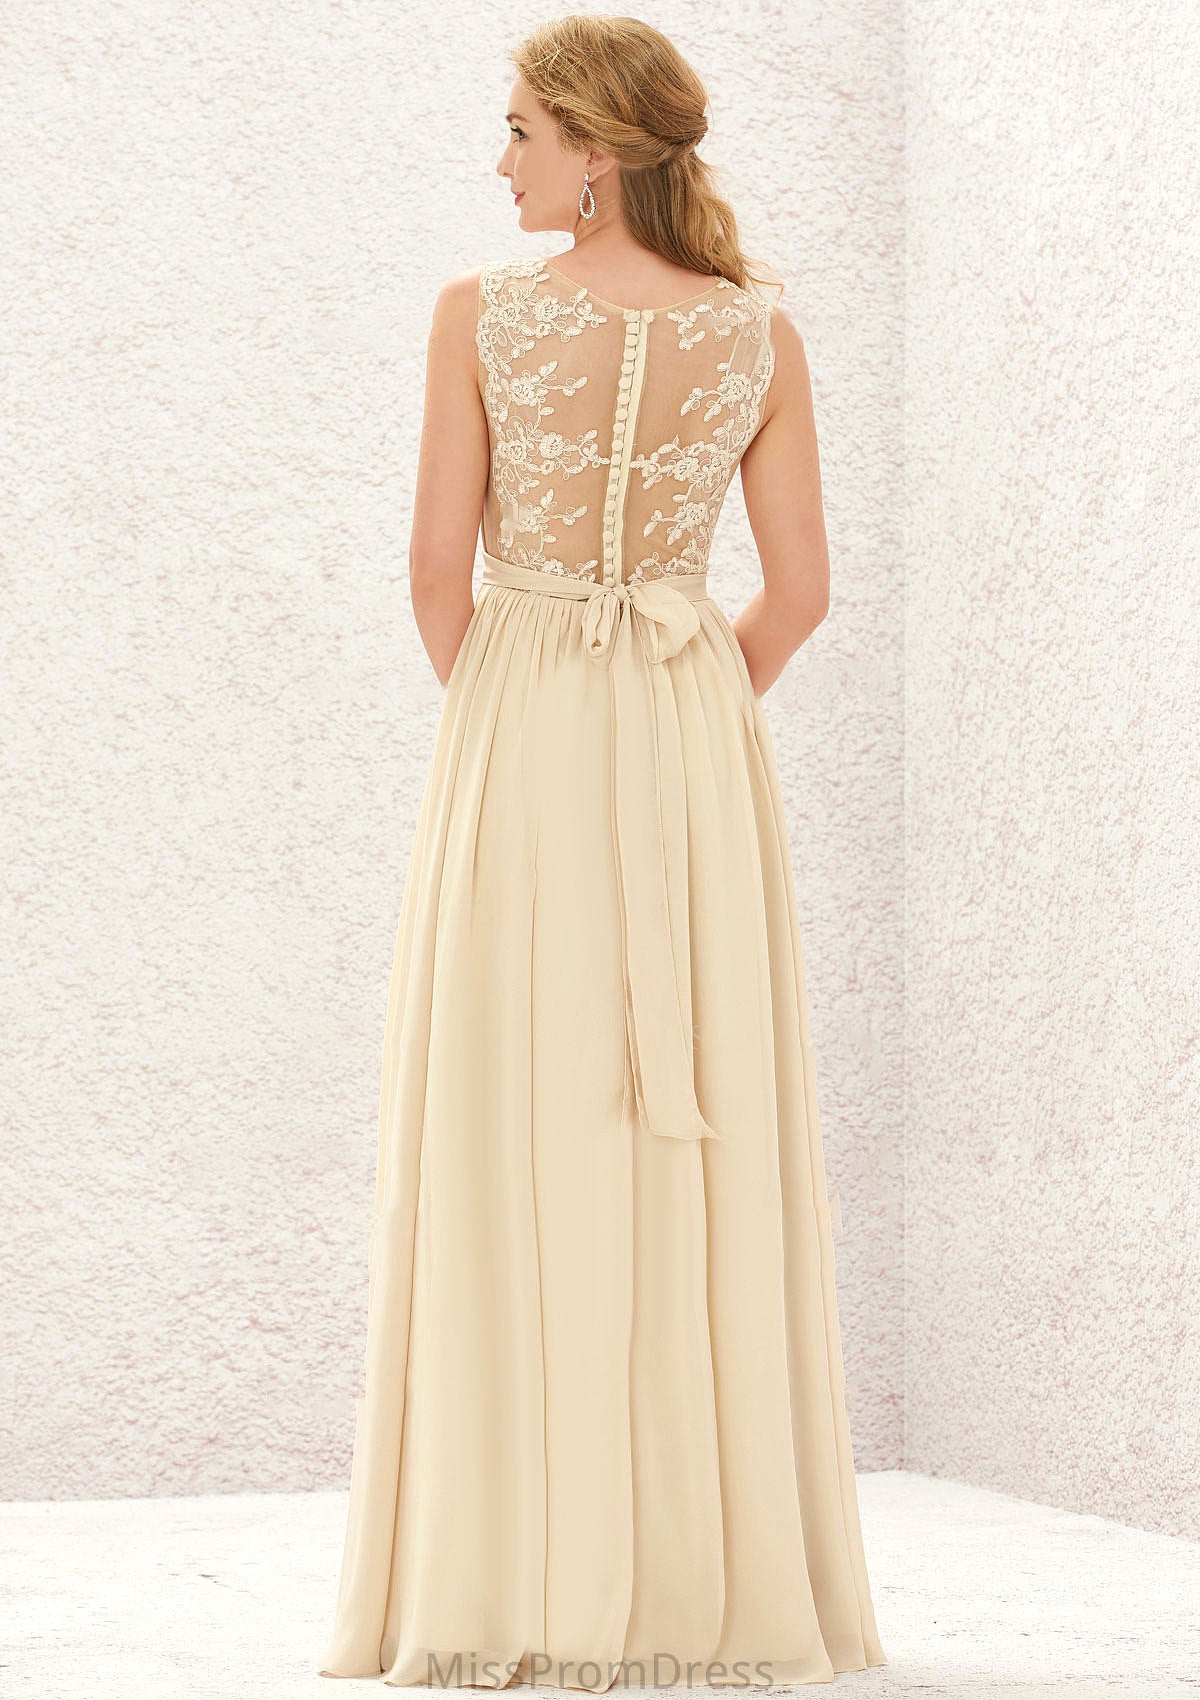 A-line V Neck Sleeveless Chiffon Long/Floor-Length Bridesmaid Dresses With Appliqued Sashes Pleated Emmy HMP0025630